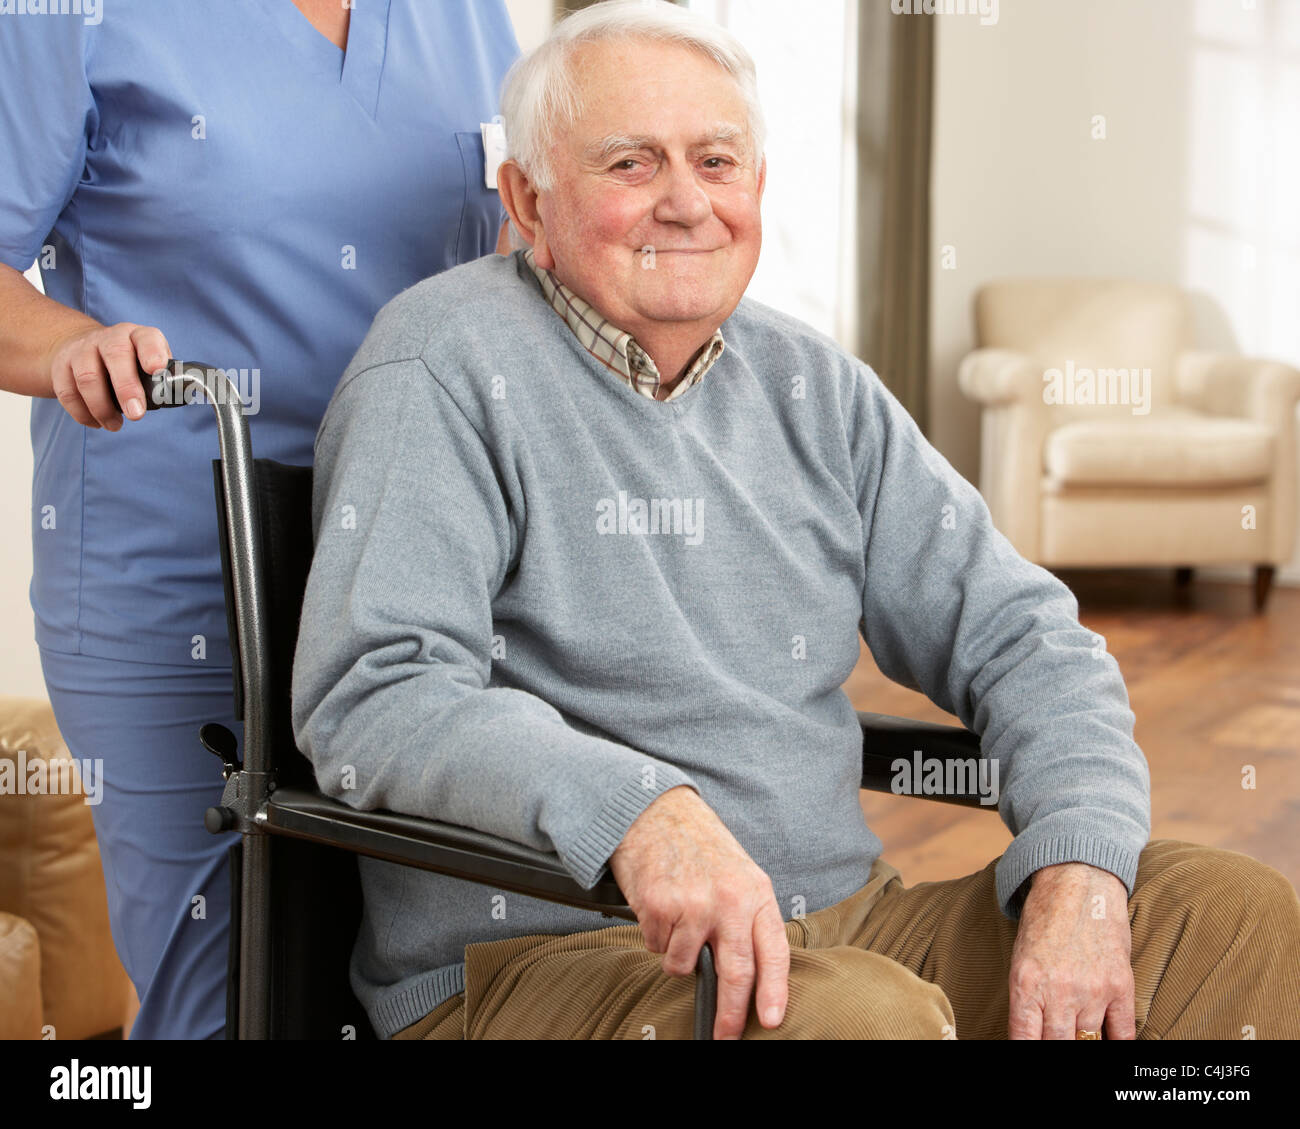 Disabled Senior Man Sitting In Wheelchair With Carer Behind Stock Photo